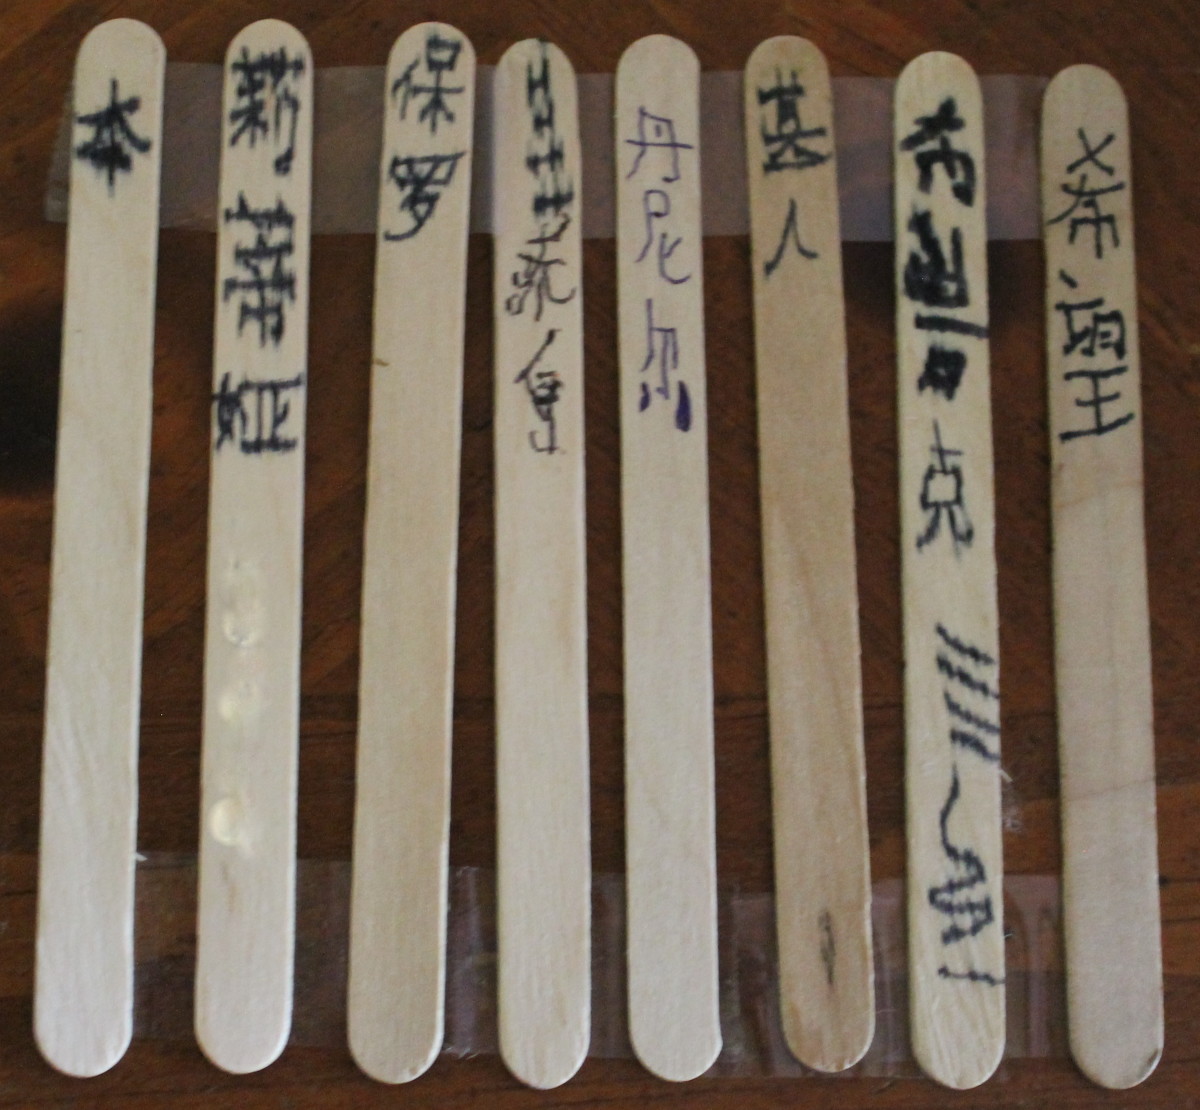 The finished bamboo scroll - We used tape to attach them, but you can use string if you want it to look more authentic.